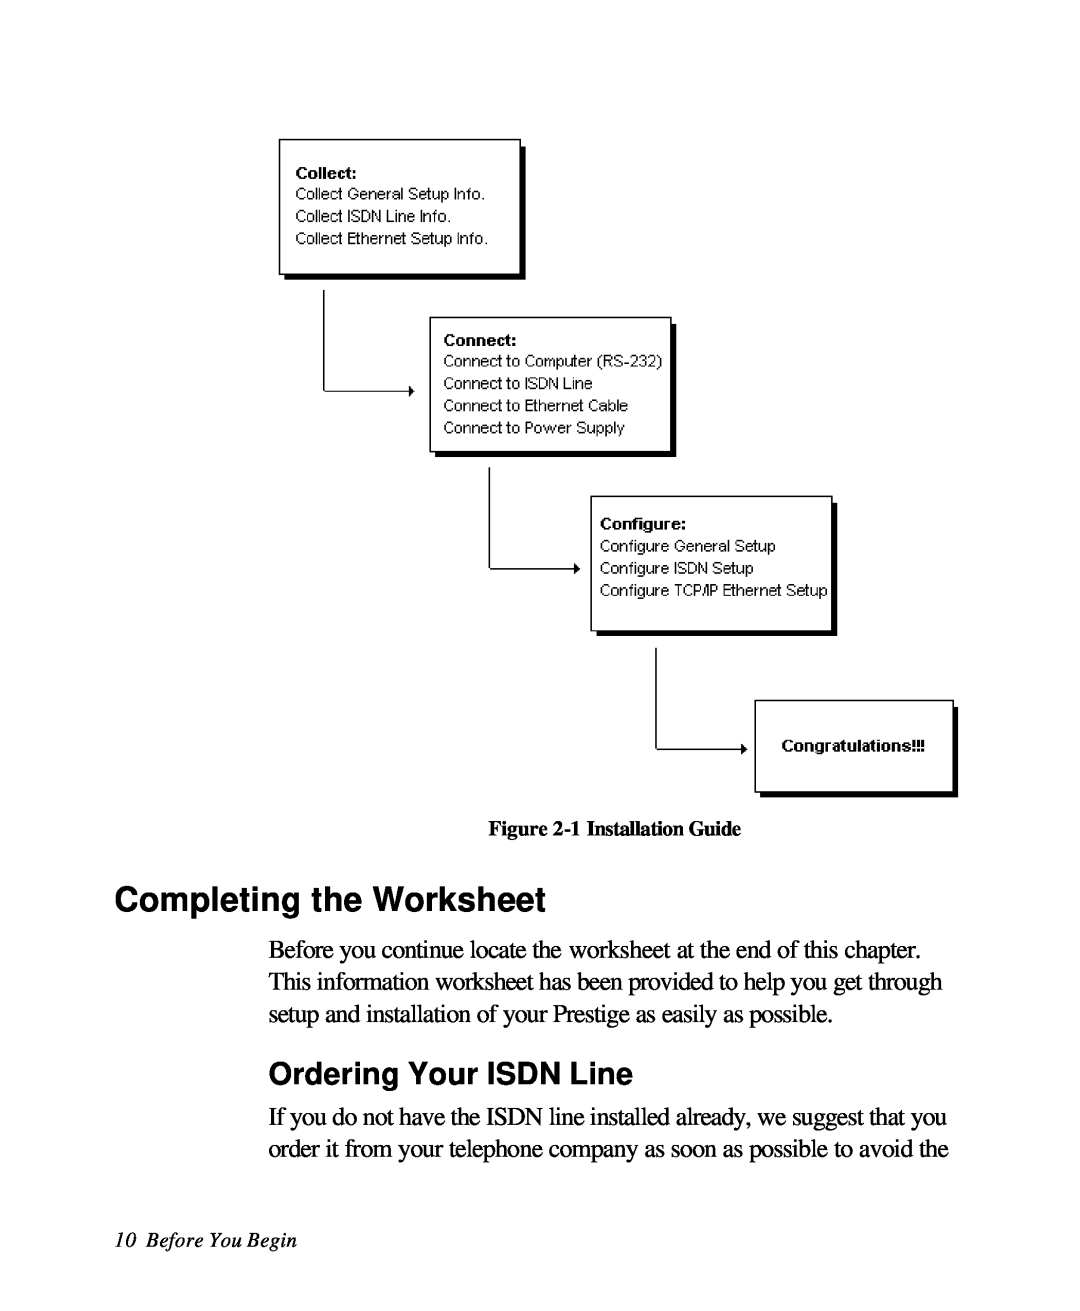 ZyXEL Communications 28641 user manual Completing the Worksheet, Ordering Your ISDN Line 